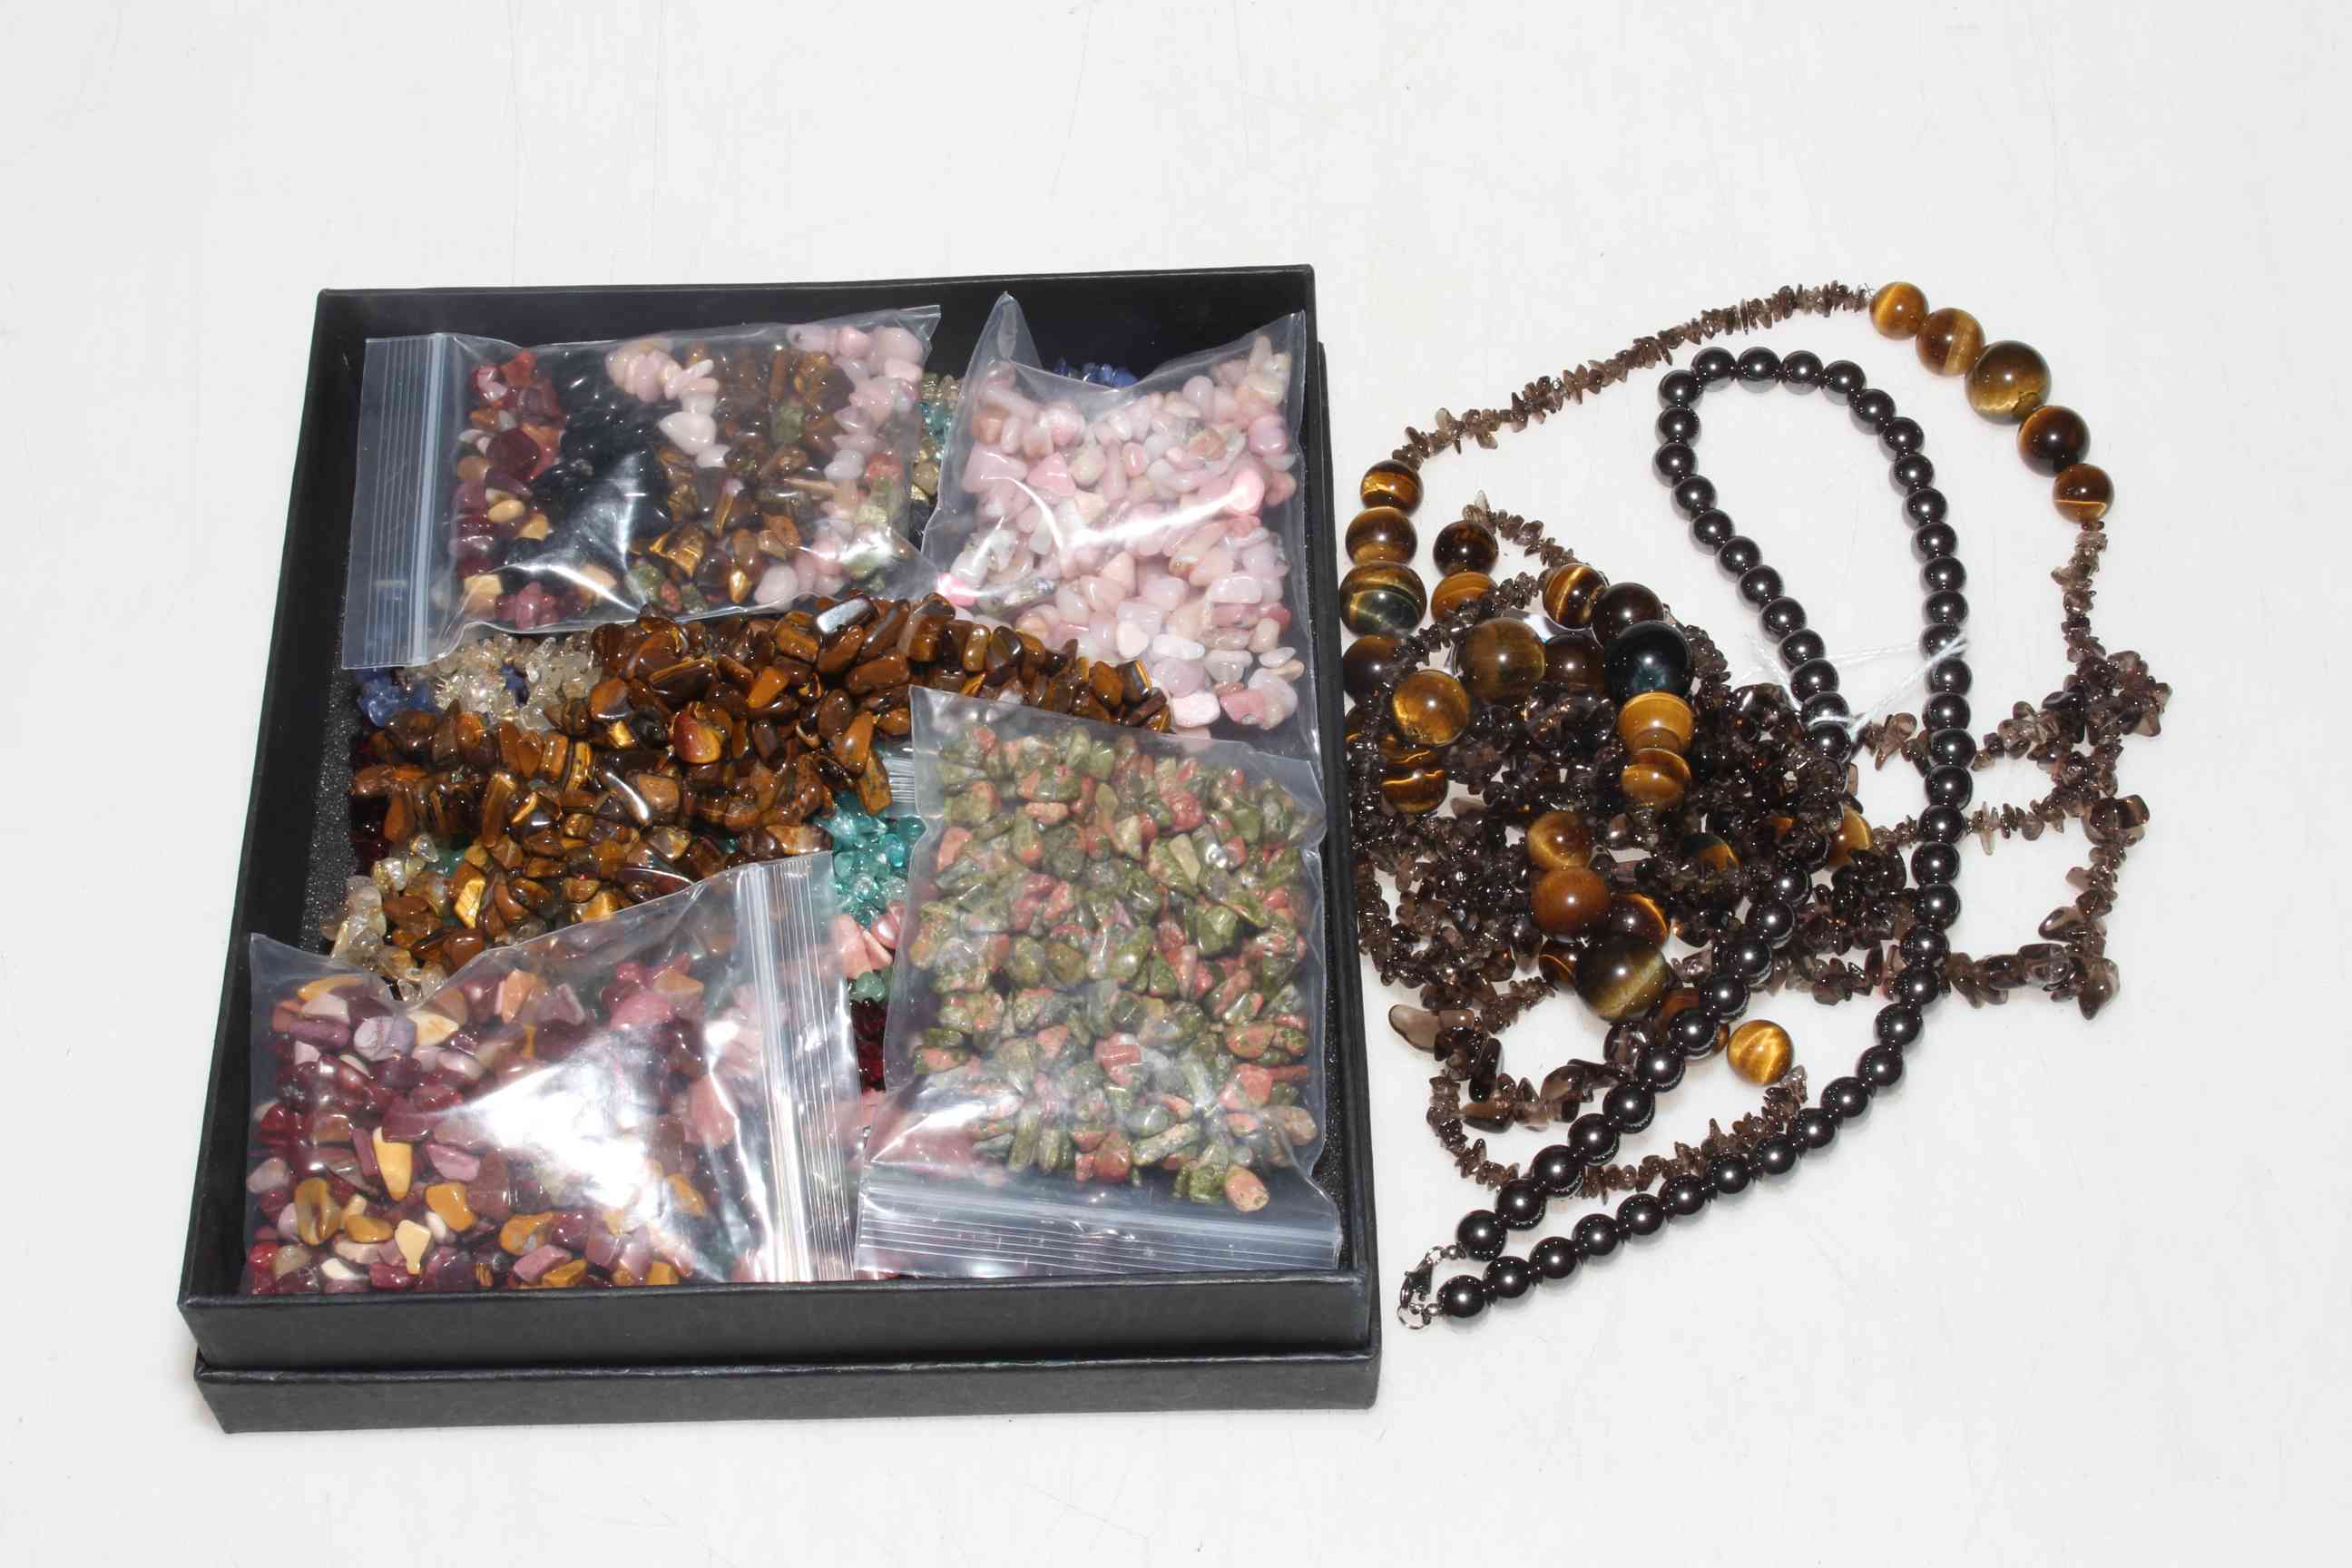 Necklaces and stones including Tigers Eye.